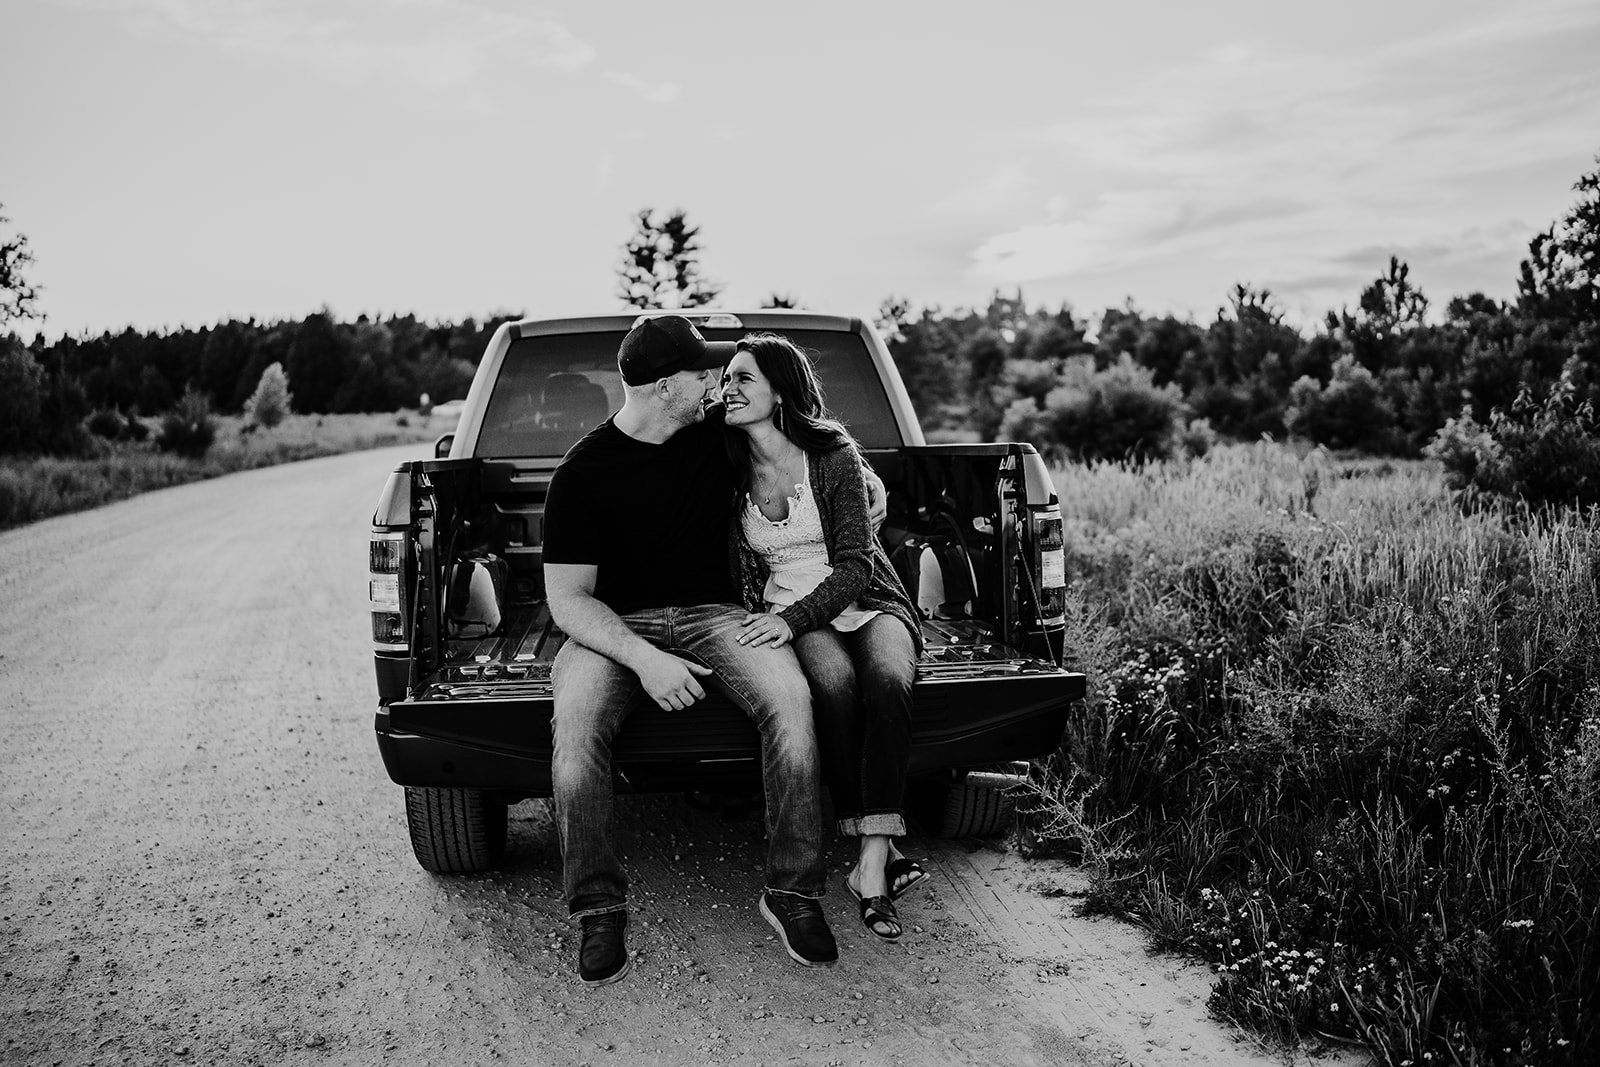 A happy couple sits in the bed of their truck, sharing smiles and affectionate glances with each other, creating a moment of intimacy amidst their outdoor adventure.